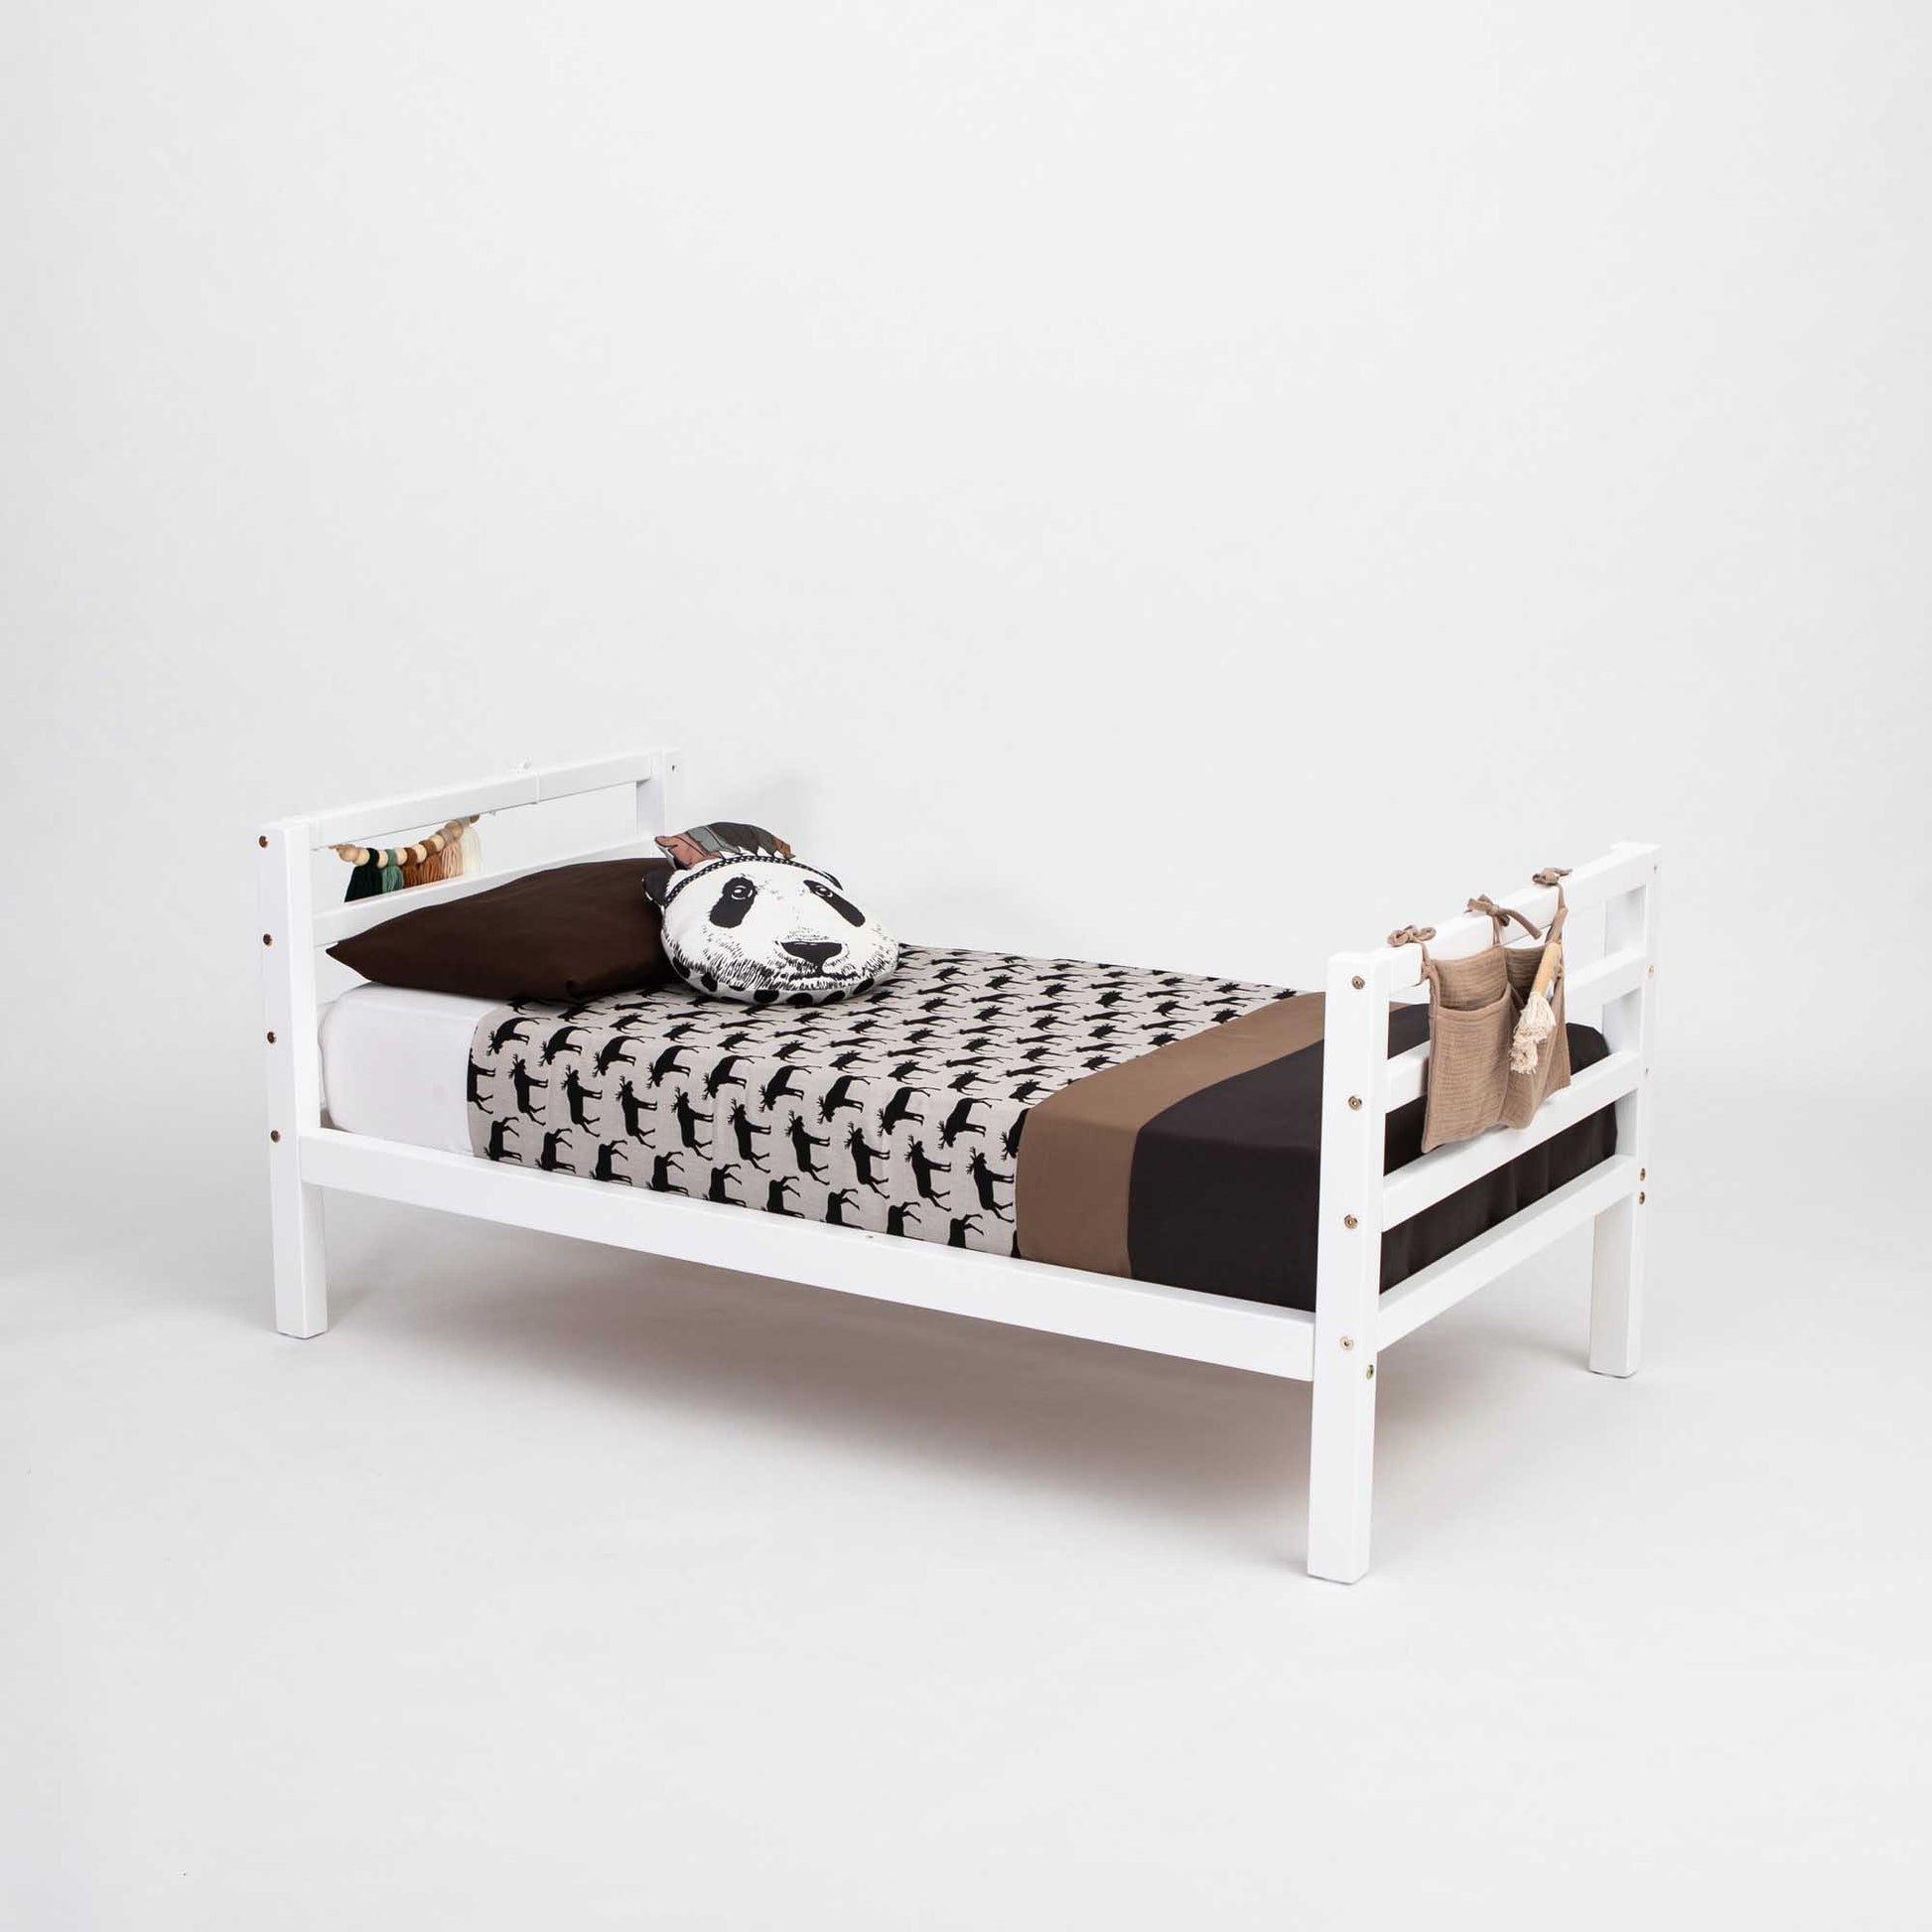 A Sweet Home From Wood Kids' bed on legs with a horizontal rail headboard and footboard, featuring a white wooden design and adorned with a black and brown pillow for comfortable co-sleeping.